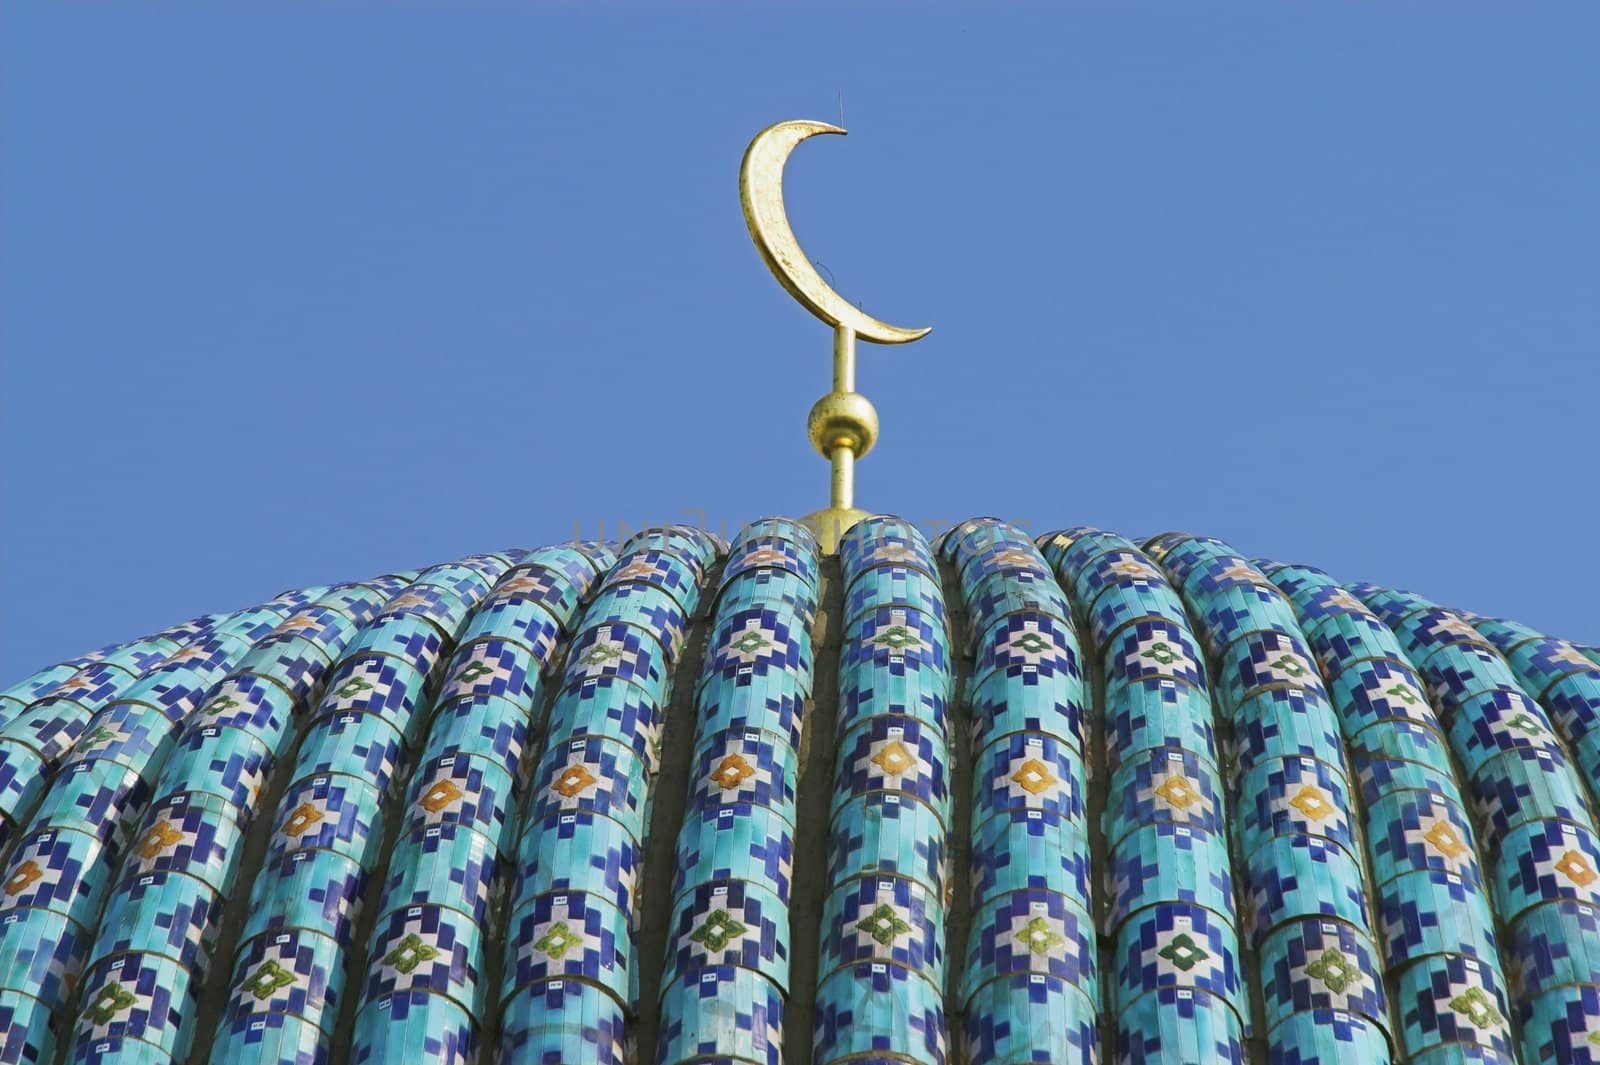 The top of the tiled dome With Arabic mosaics of the ancient mosque in Saint Petersburg, Russia.